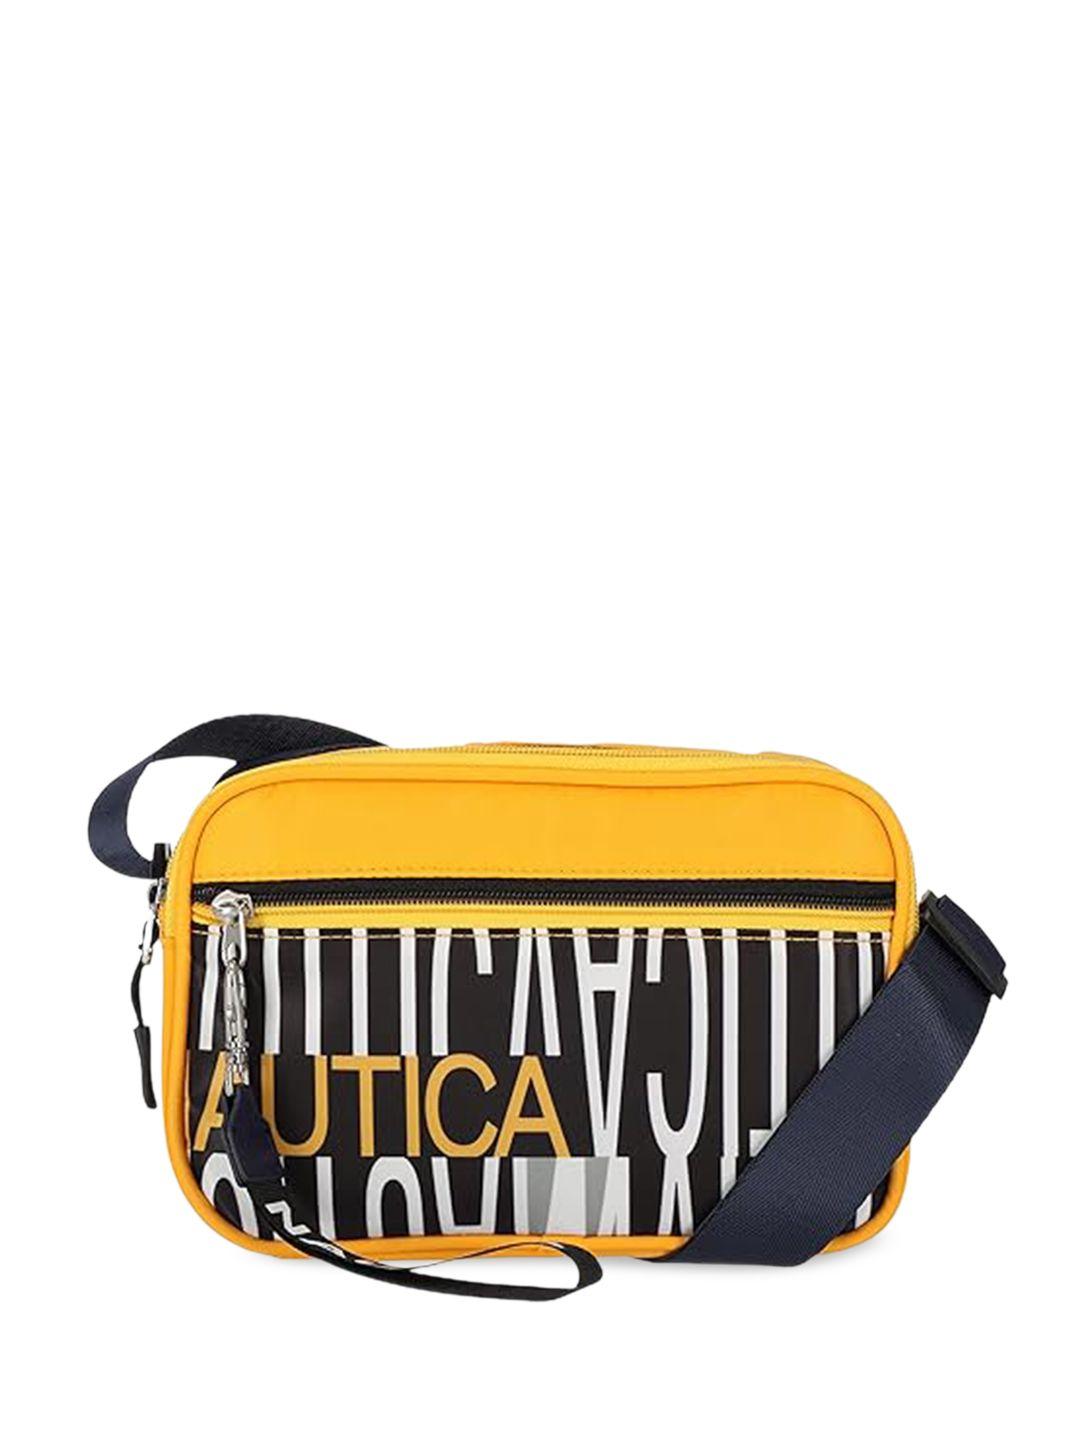 nautica typography printed structured shoulder bag